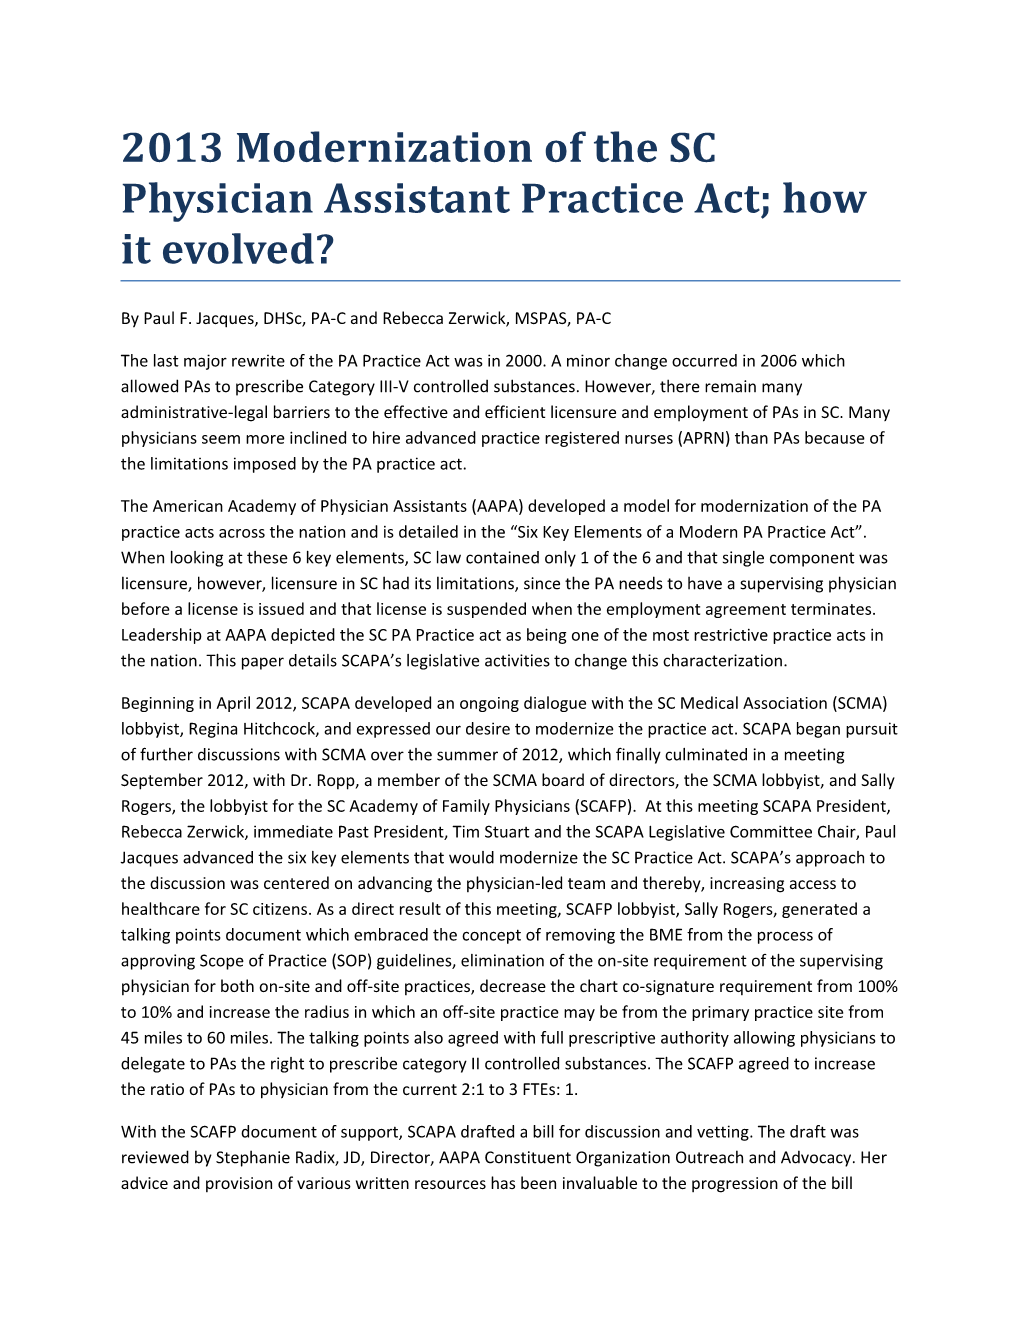 2013 Modernization of the SC Physician Assistant Practice Act; How It Evolved?